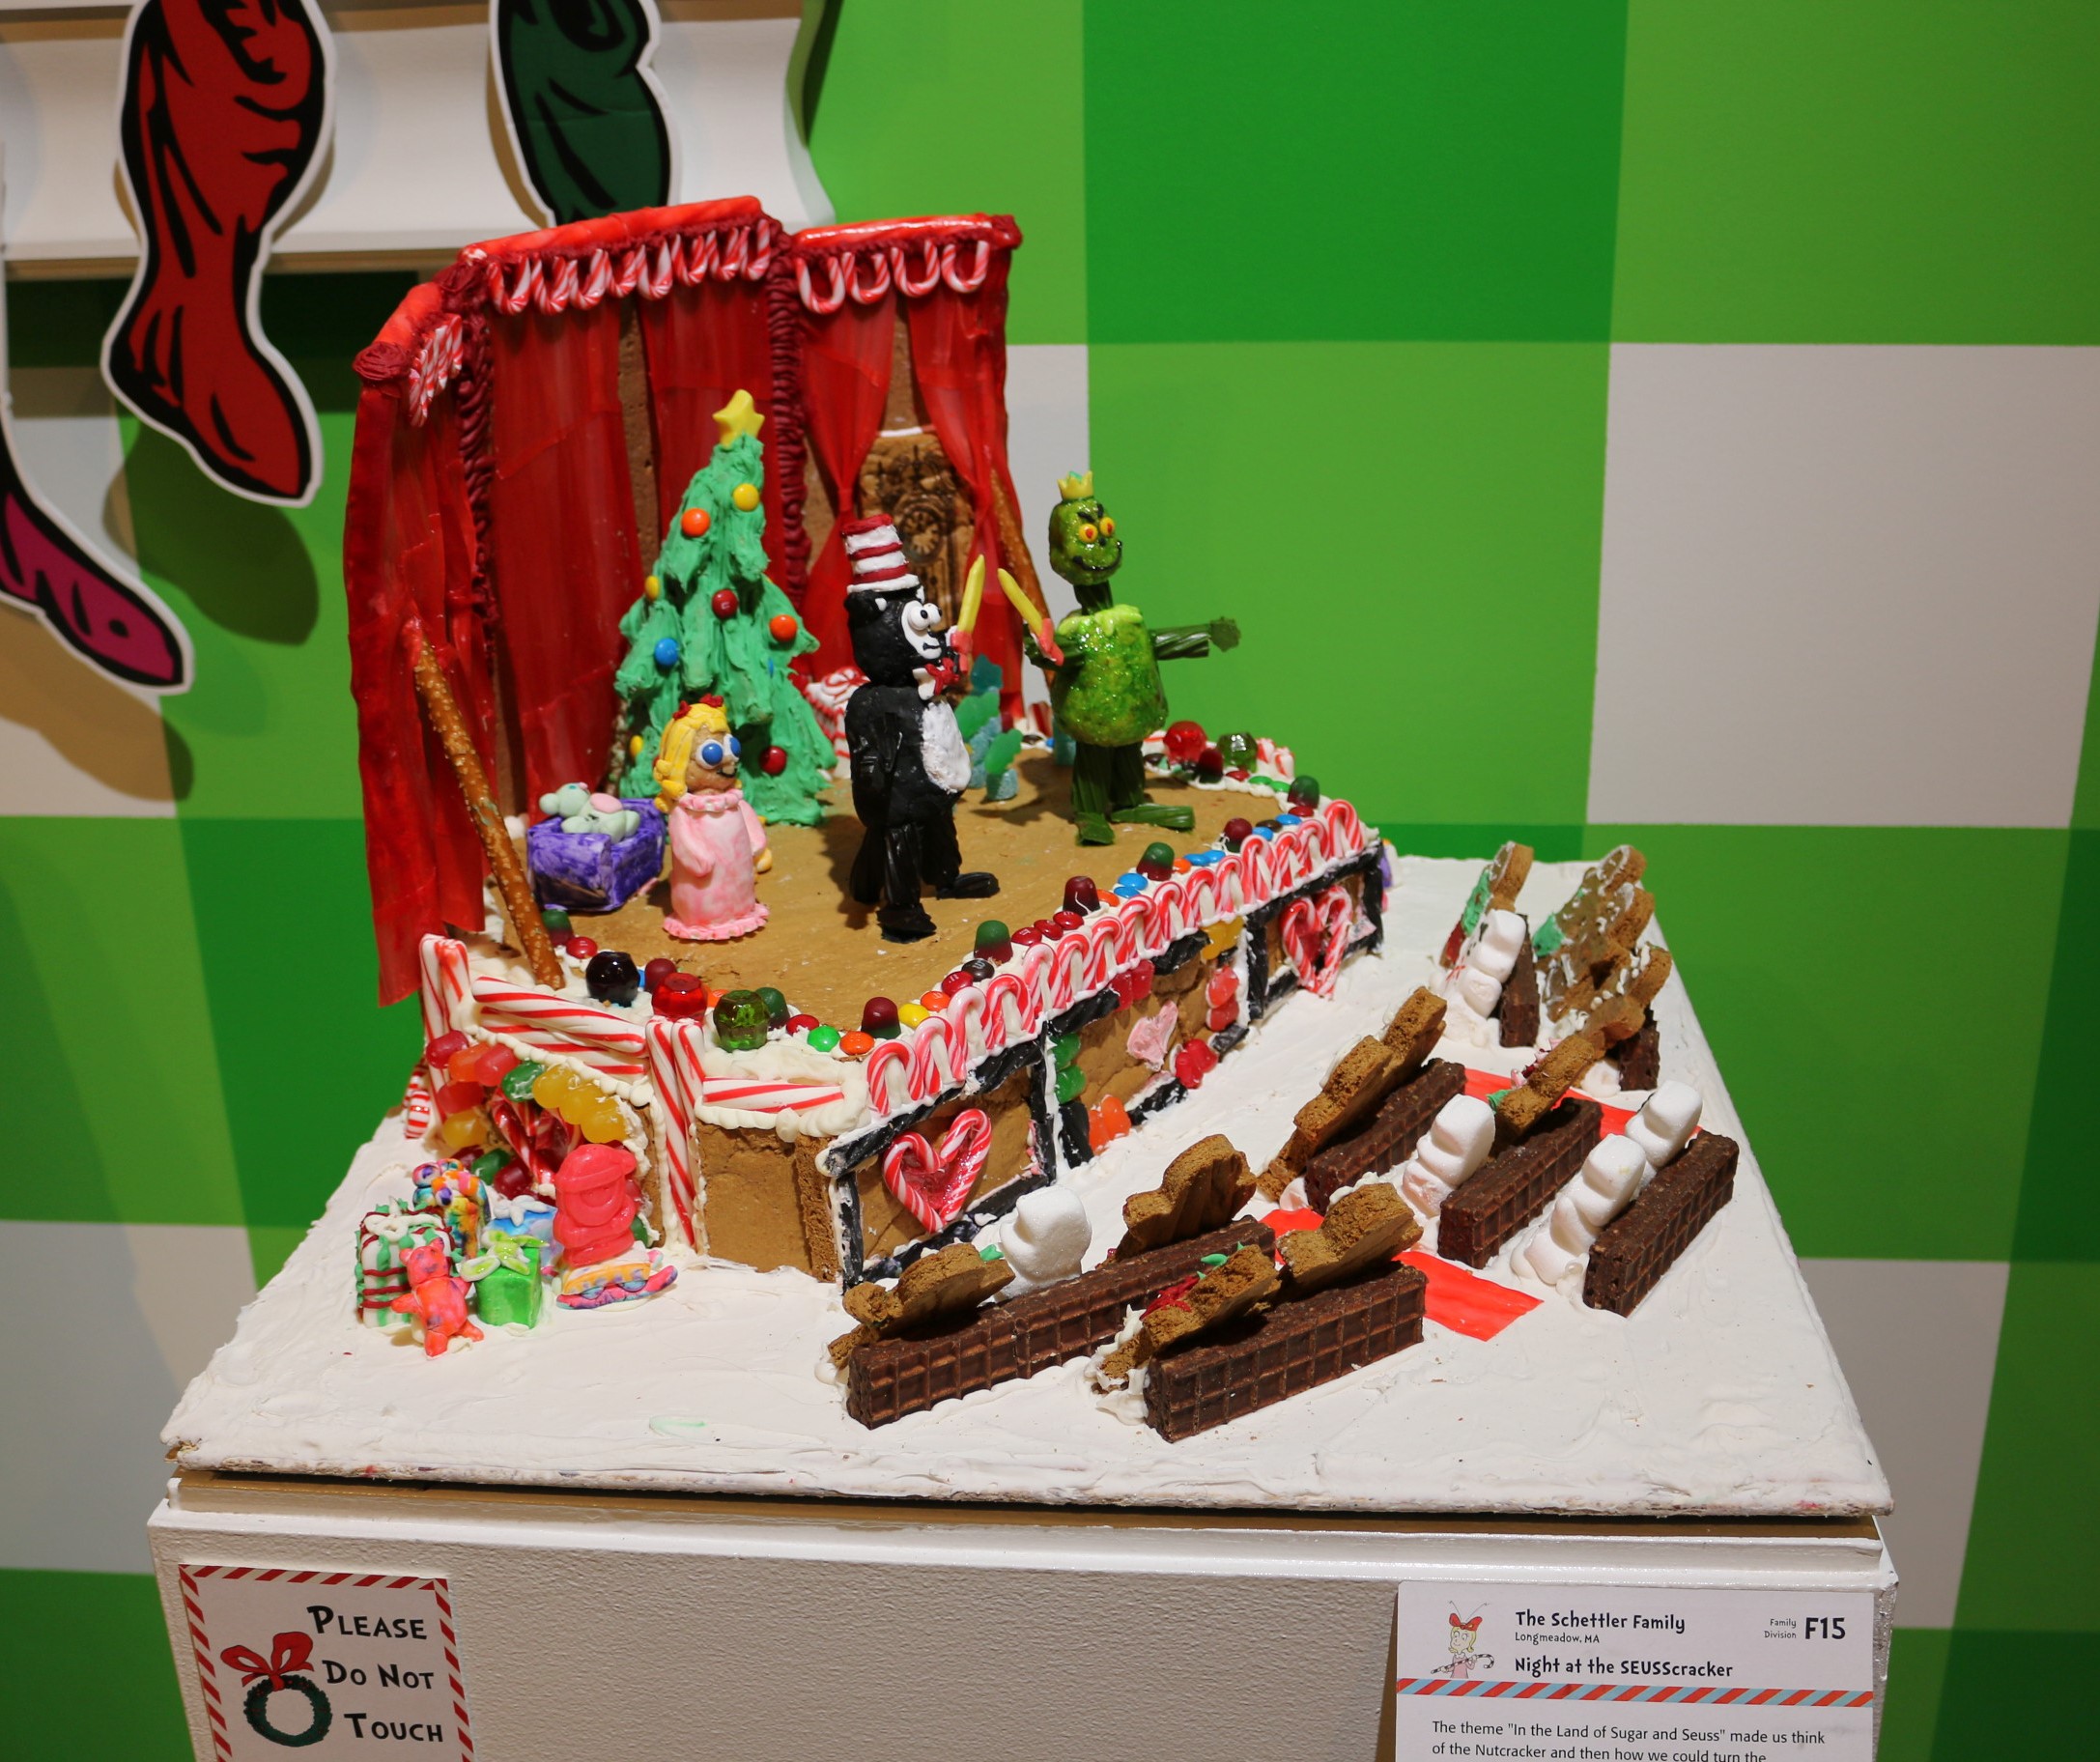 Gingerbread display titled "Night at the SEUSScracker" by The Schettler Family